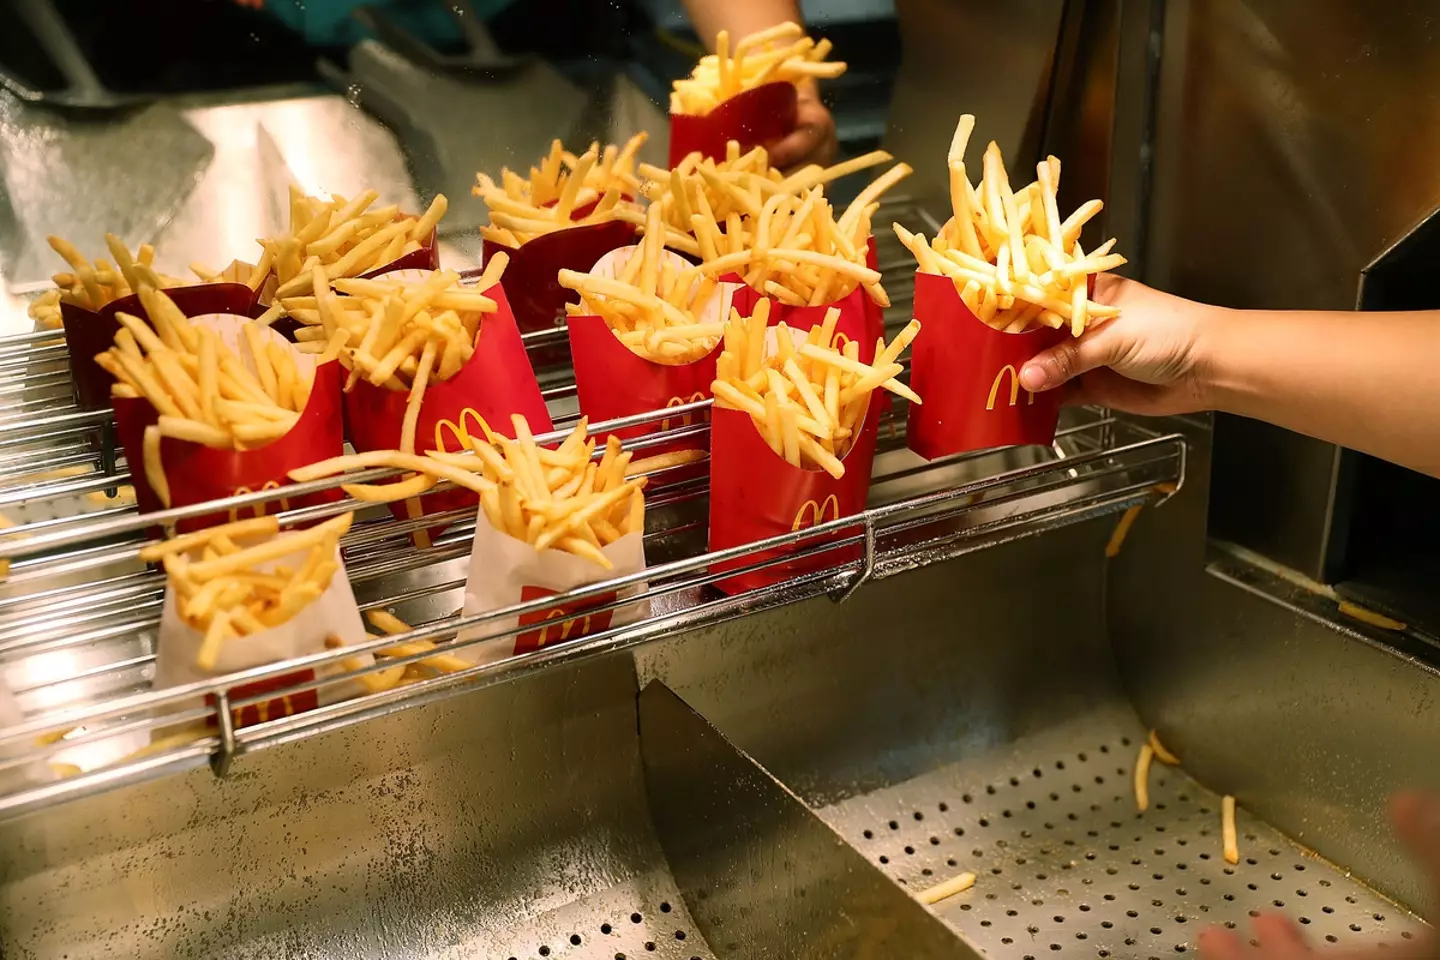 In addition to fries, you can get hash browns in your late night Maccies order.